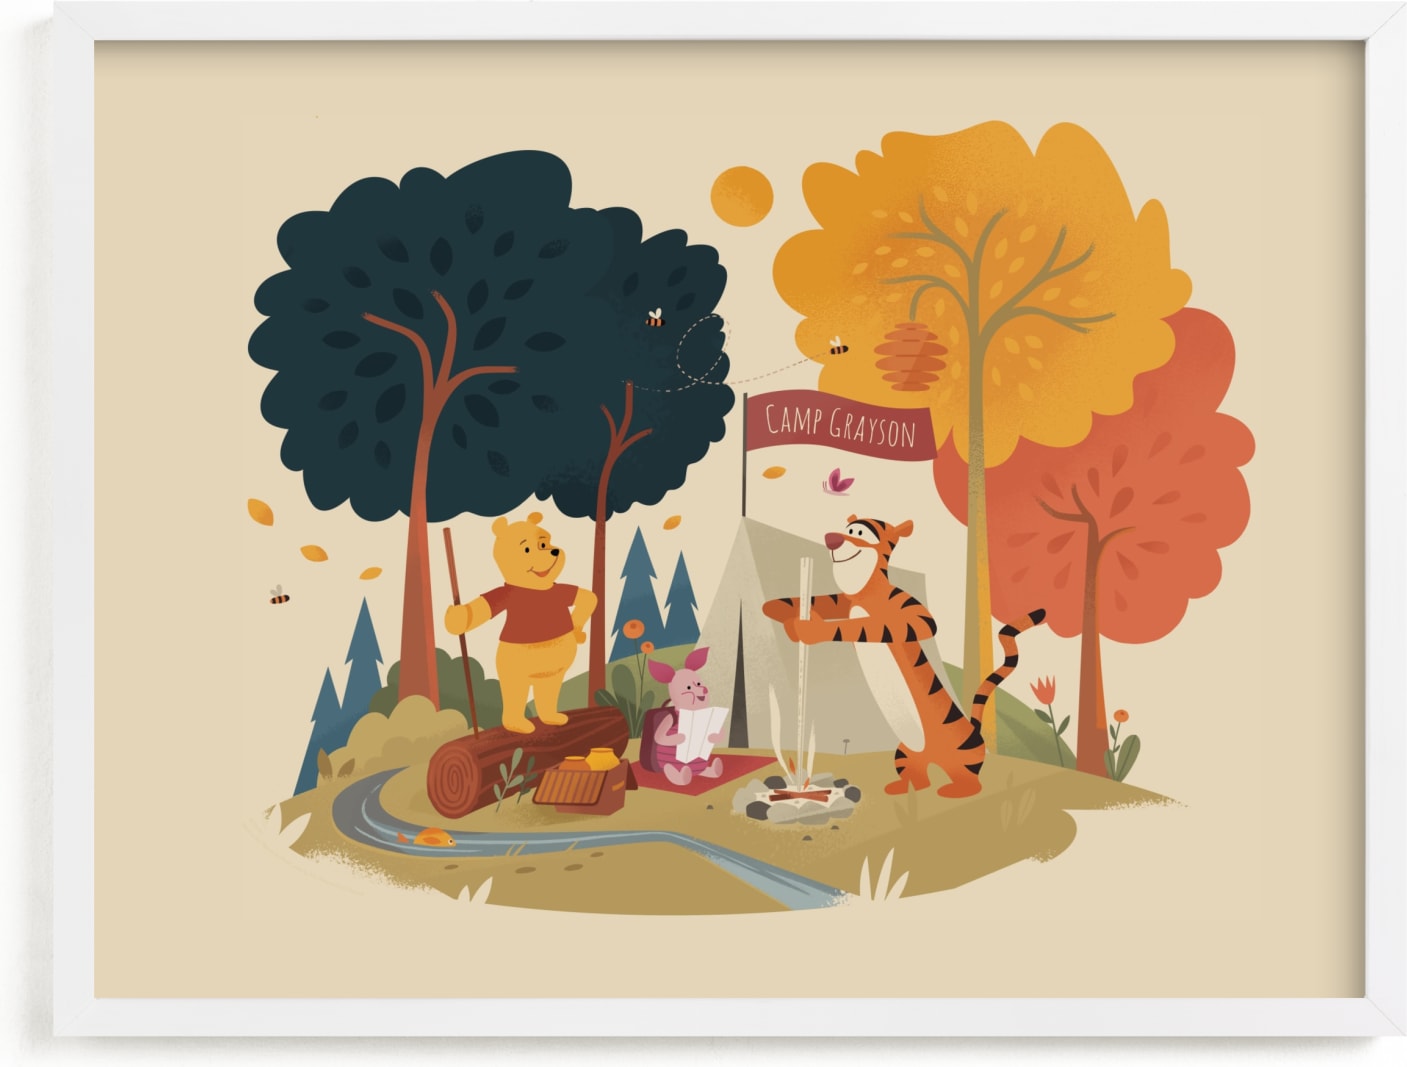 This is a beige disney art by Morgan Ramberg called Pooh Goes Camping | Winnie The Pooh.